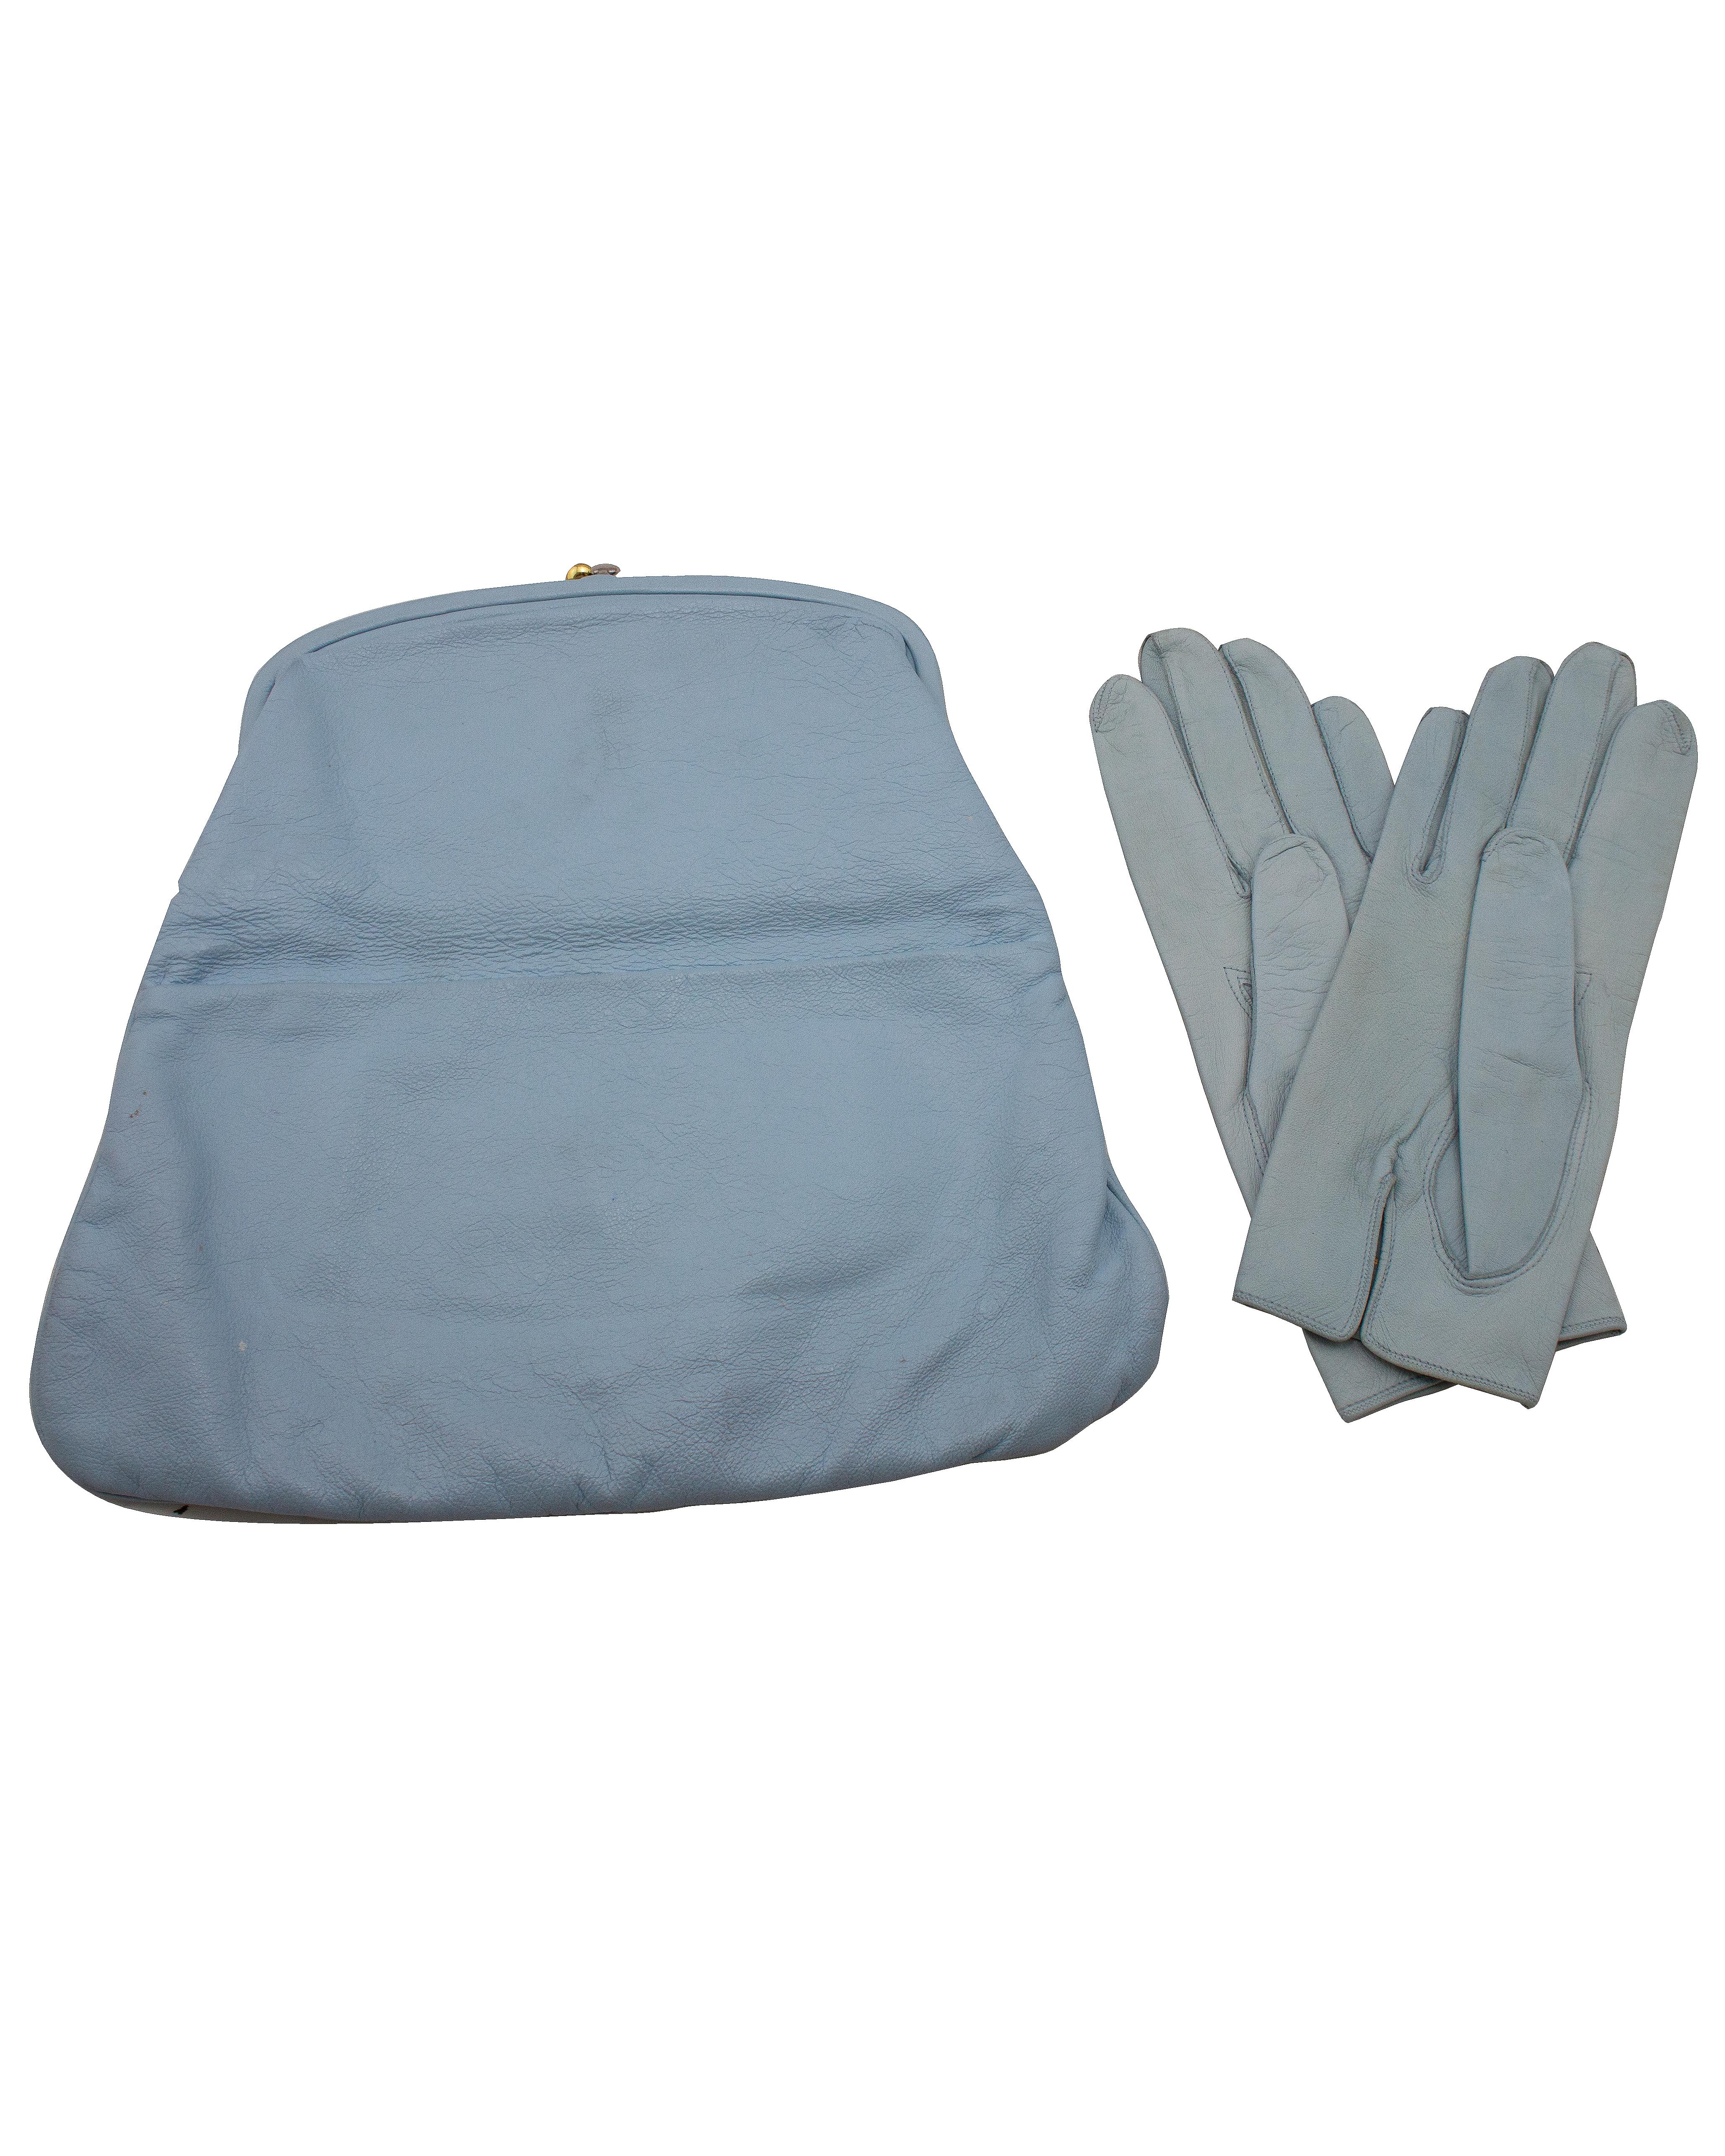 1950's baby blue kid leather classic Coblentz fold over clutch with matching baby blue leather gloves. Rarely found in leather, this classic shape is lined in navy corded silk and closes with a gilt metal hard frame kiss lock. The added feature of